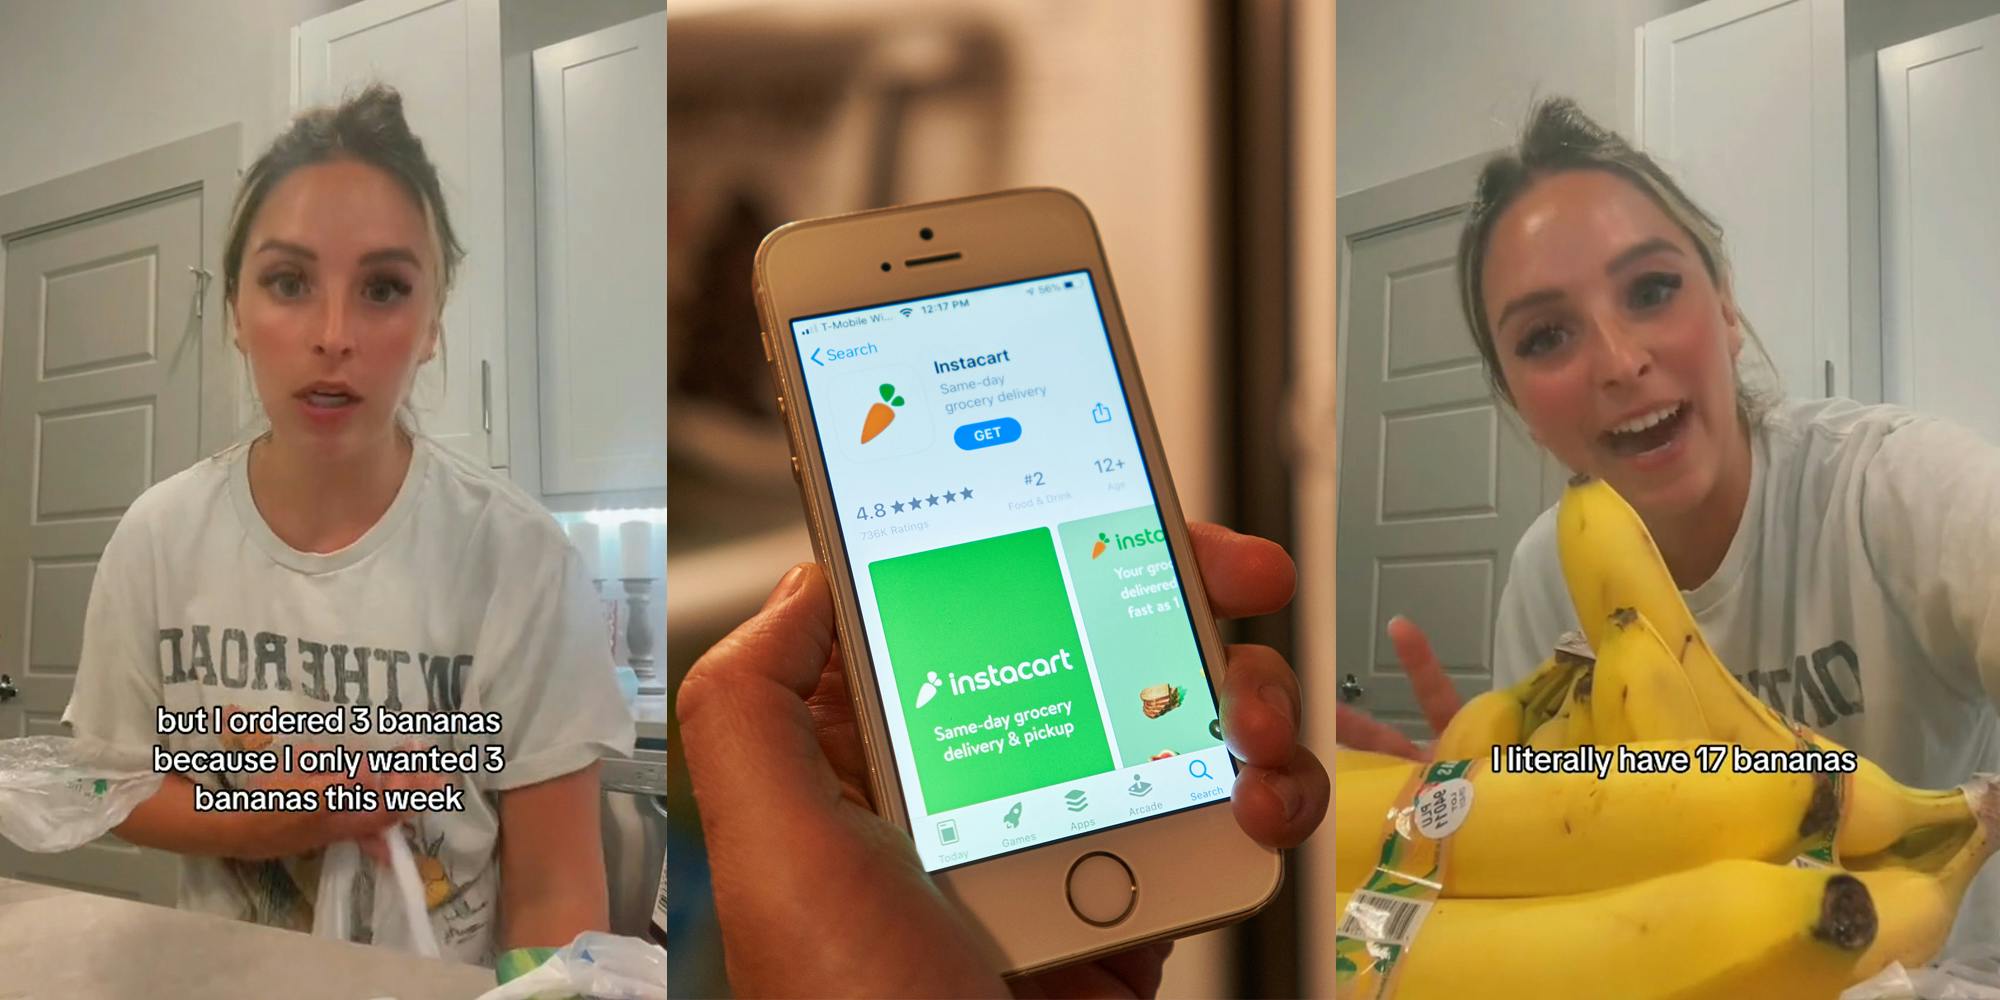 Instacart customer speaking with caption "but I ordered 3 bananas because I only wanted 3 bananas this week" (l) hand holding phone with Instacart app on screen (c) Instacart customer speaking with bananas with caption "I literally have 17 bananas" (r)